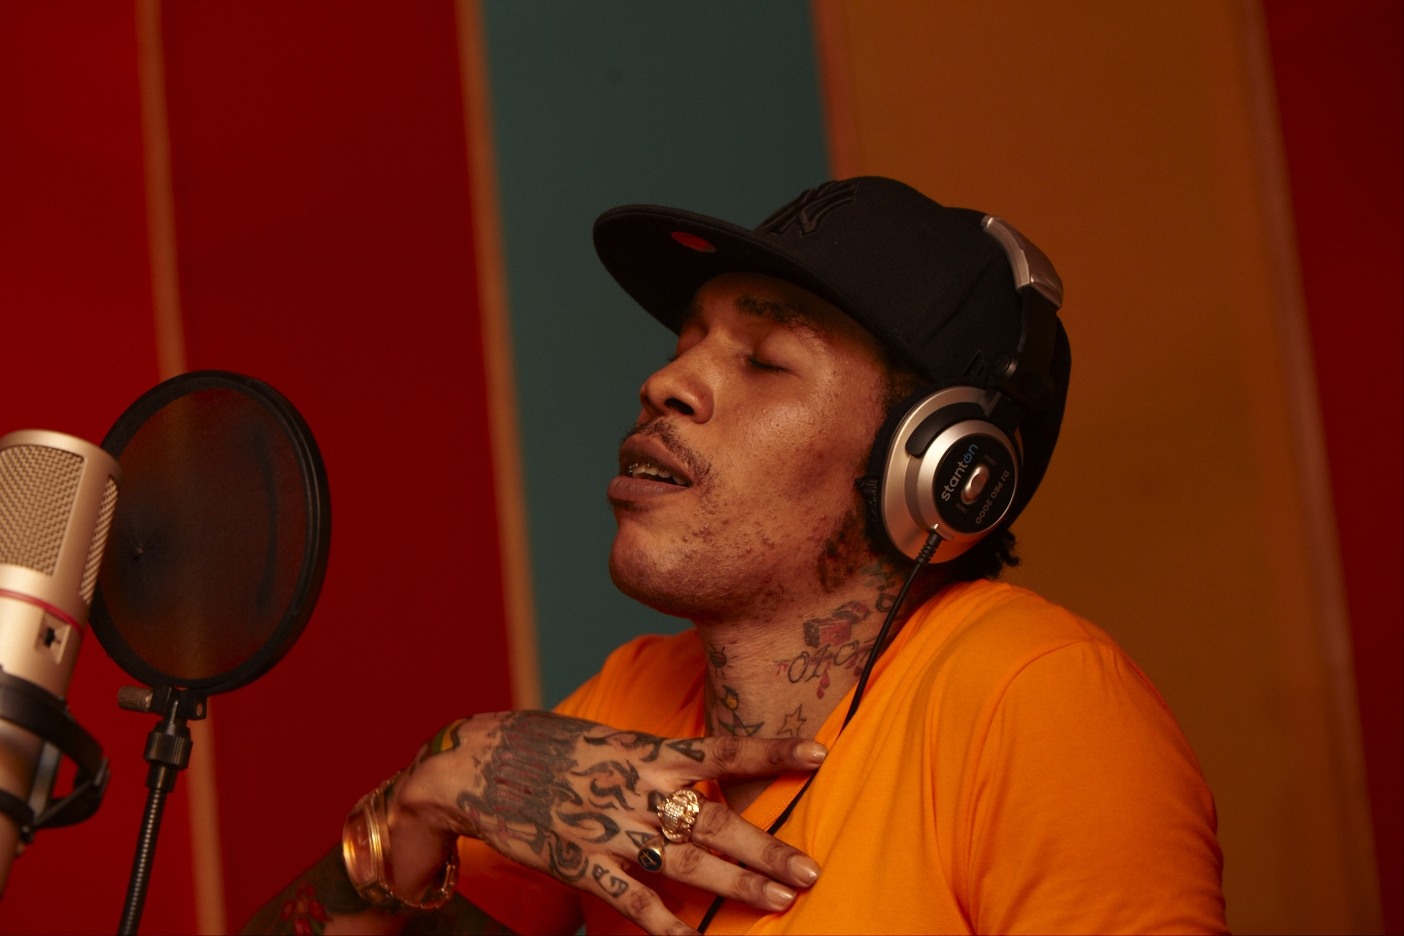 The astrological signs as Vybz Kartel songs